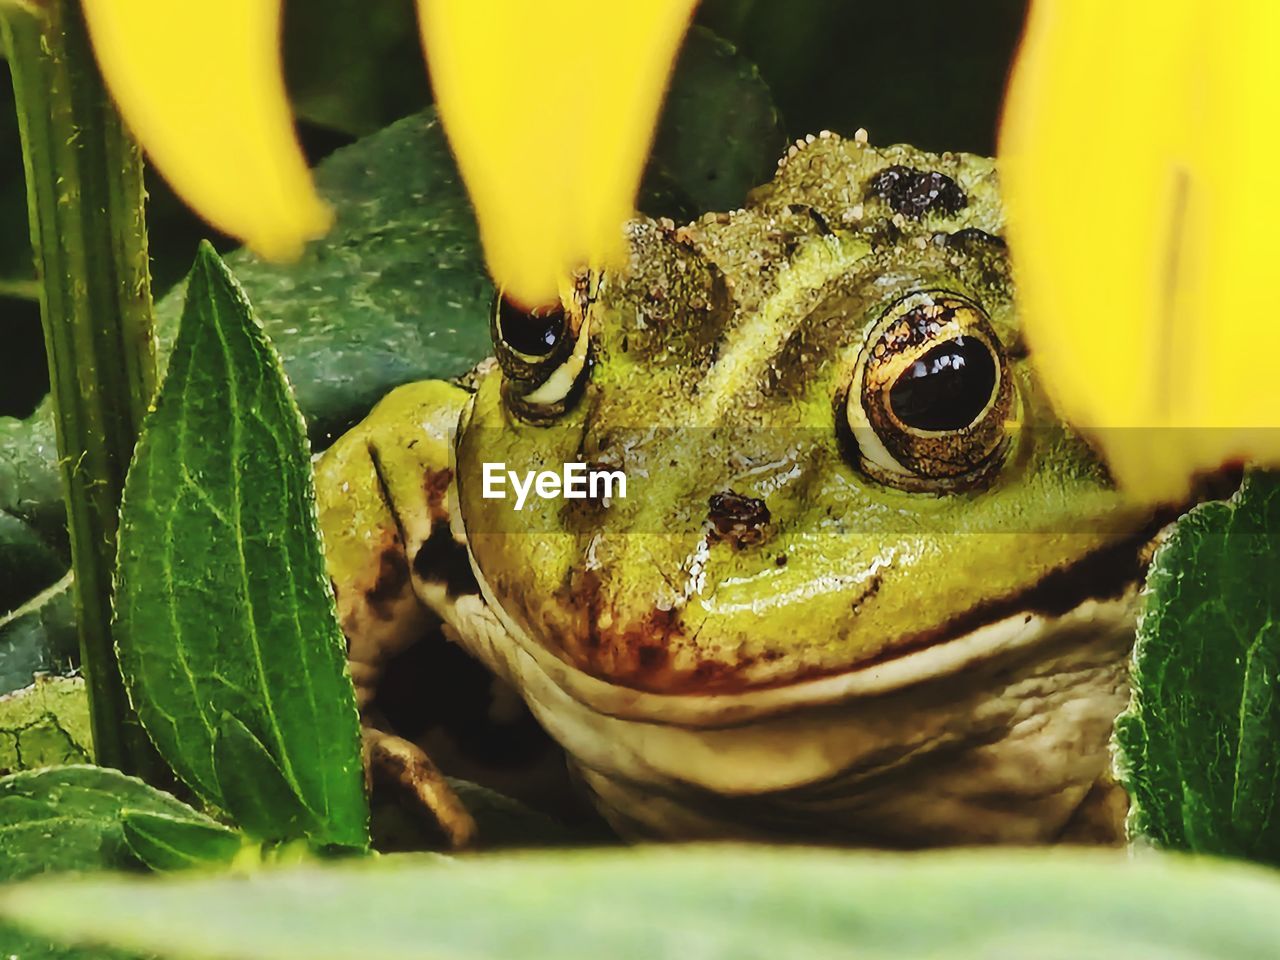 animal, animal themes, frog, true frog, animal wildlife, one animal, amphibian, green, wildlife, close-up, reptile, plant part, macro photography, leaf, nature, no people, tree frog, animal body part, plant, bullfrog, yellow, flower, toad, portrait, outdoors